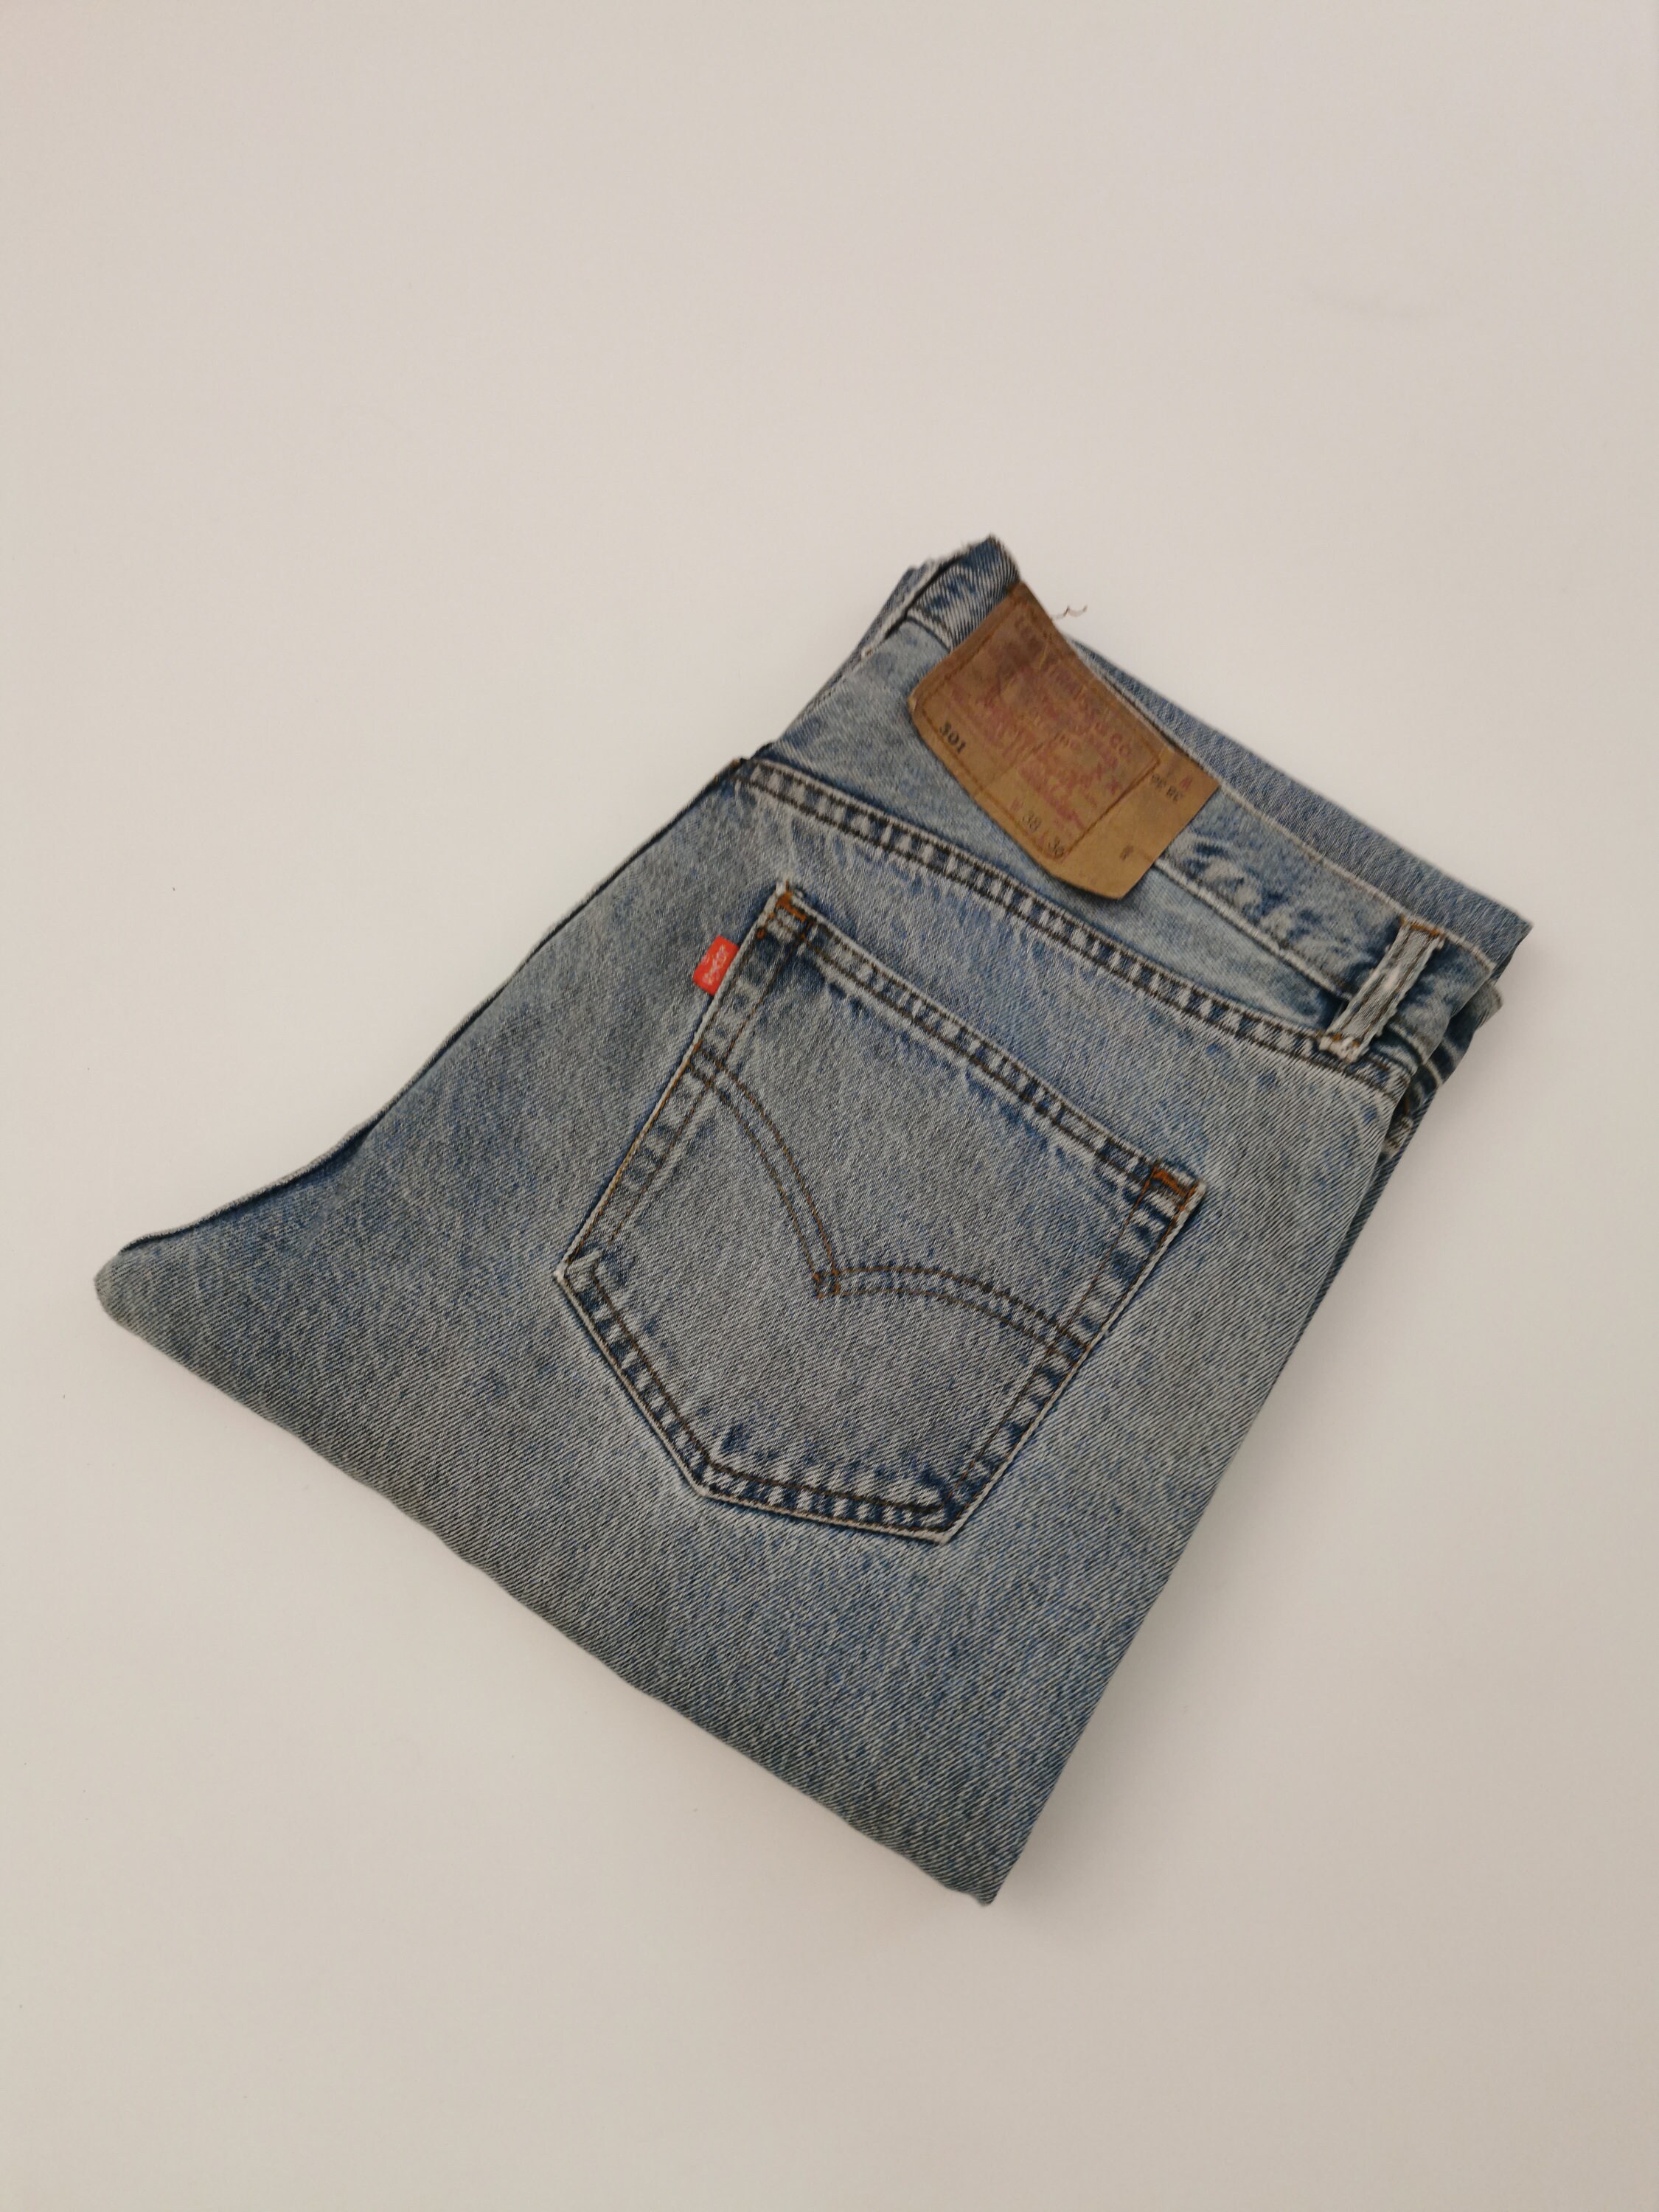 Levi's 501 Original Made in Italy 38/32 Big Size 5 - Etsy